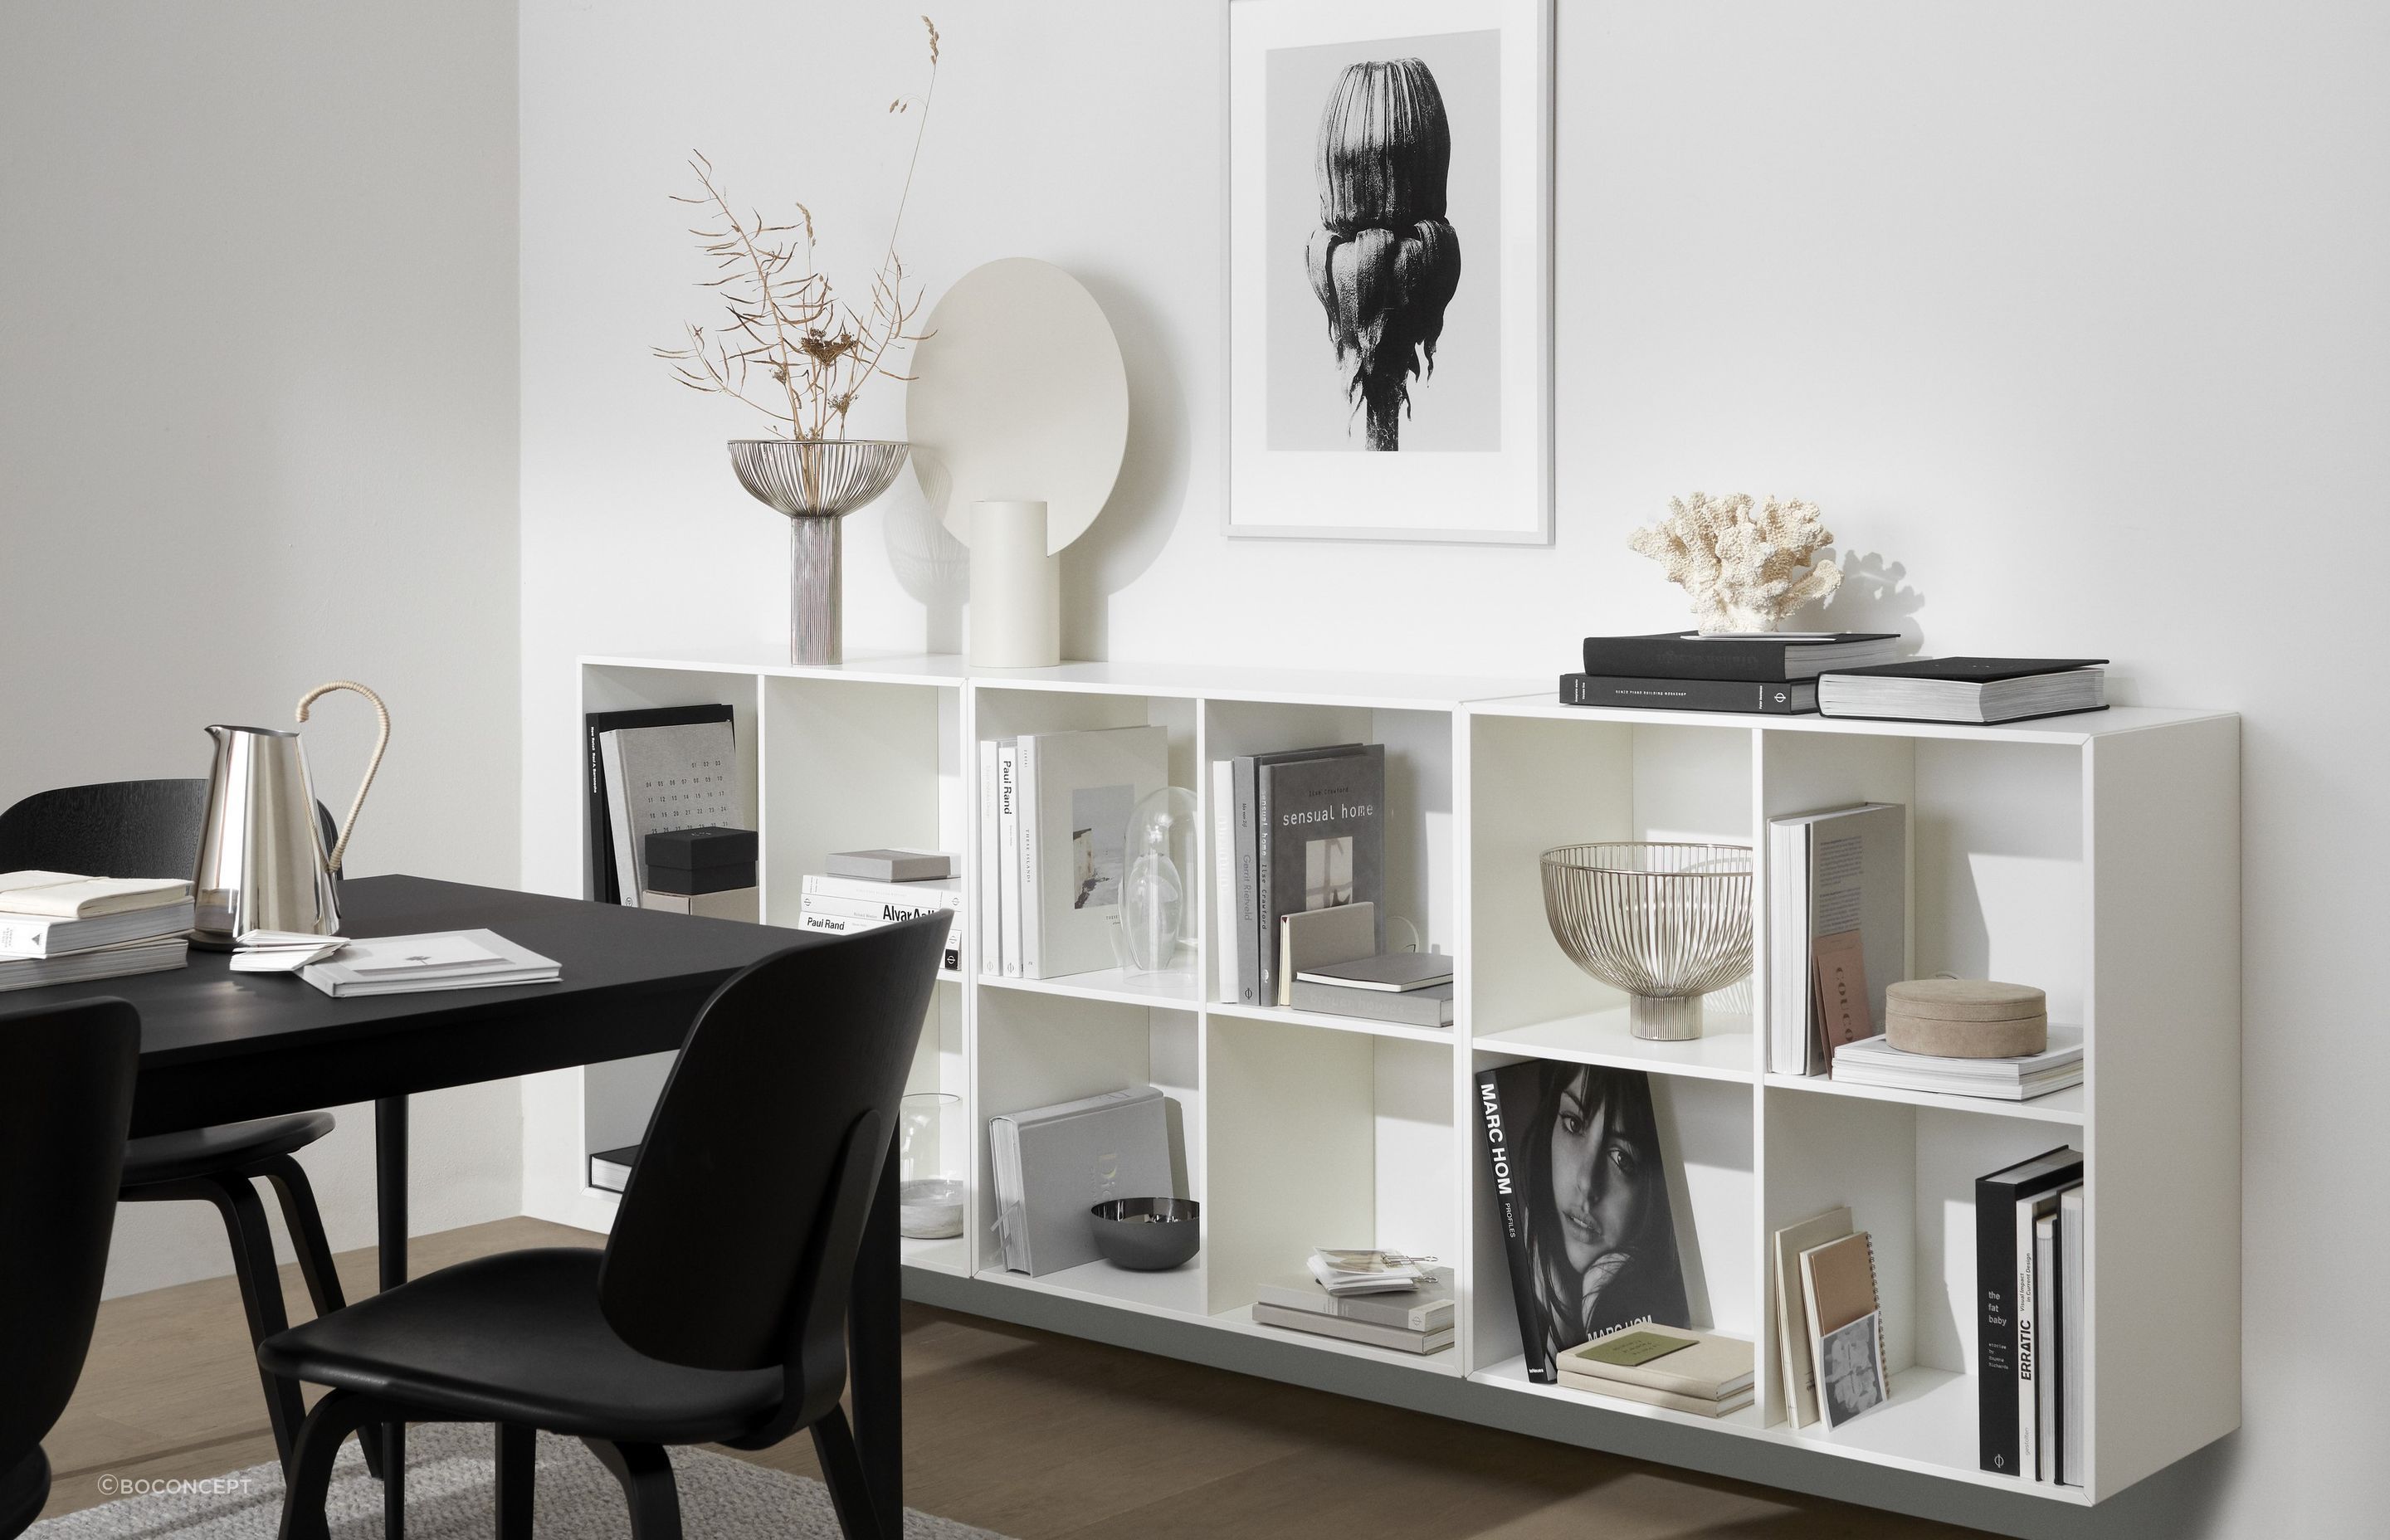 The Como Wall System Bookcase with a few personal inclusions of bookshelf decor.